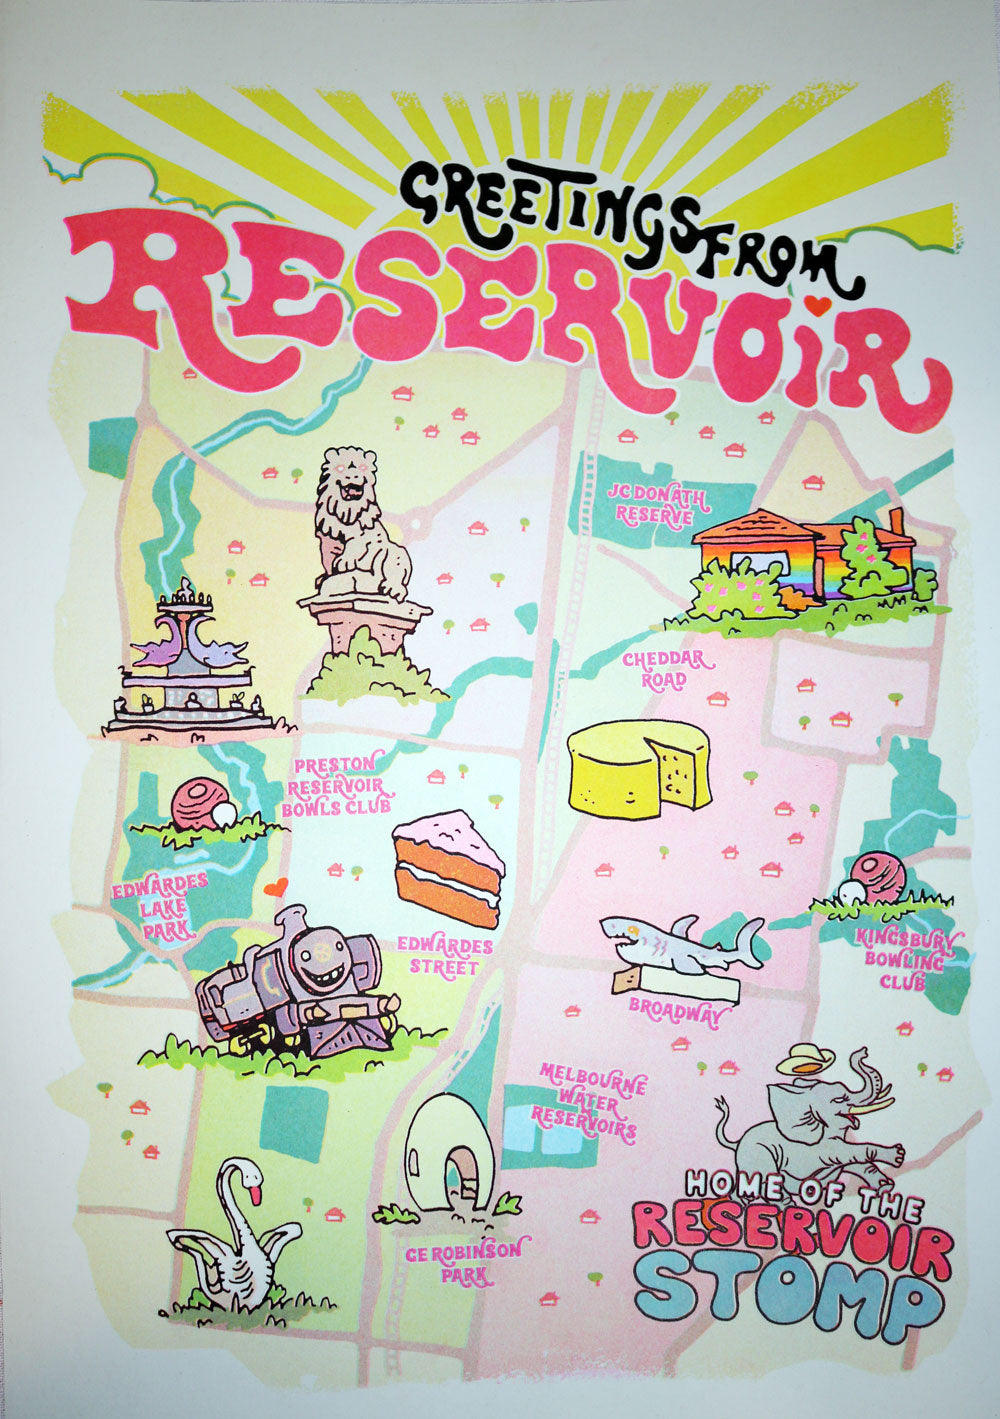 Greetings From Reservoir A3 Risograph Print [LIMITED EDITION]